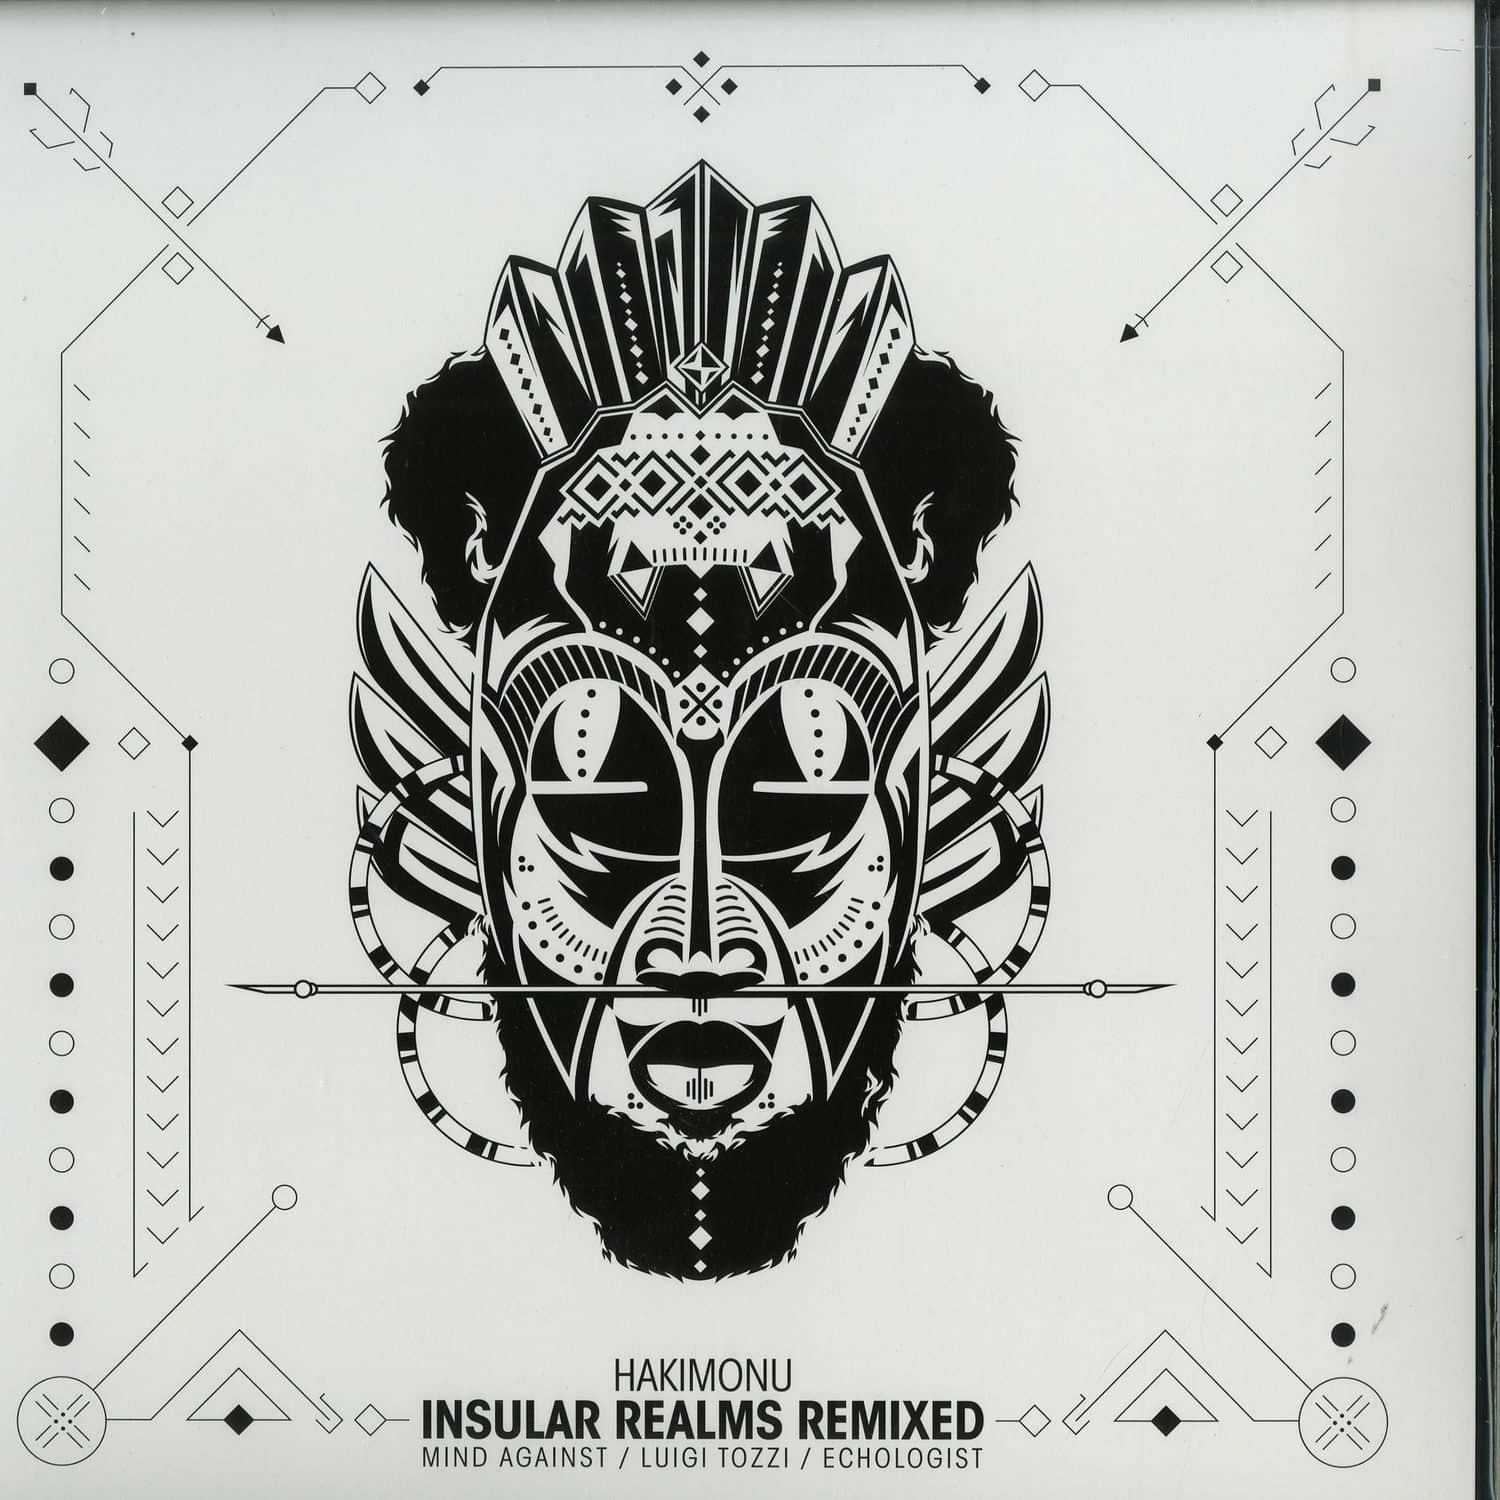 Hakimonu - INSULAR REALMS REMIXES BY MIND AGAINST